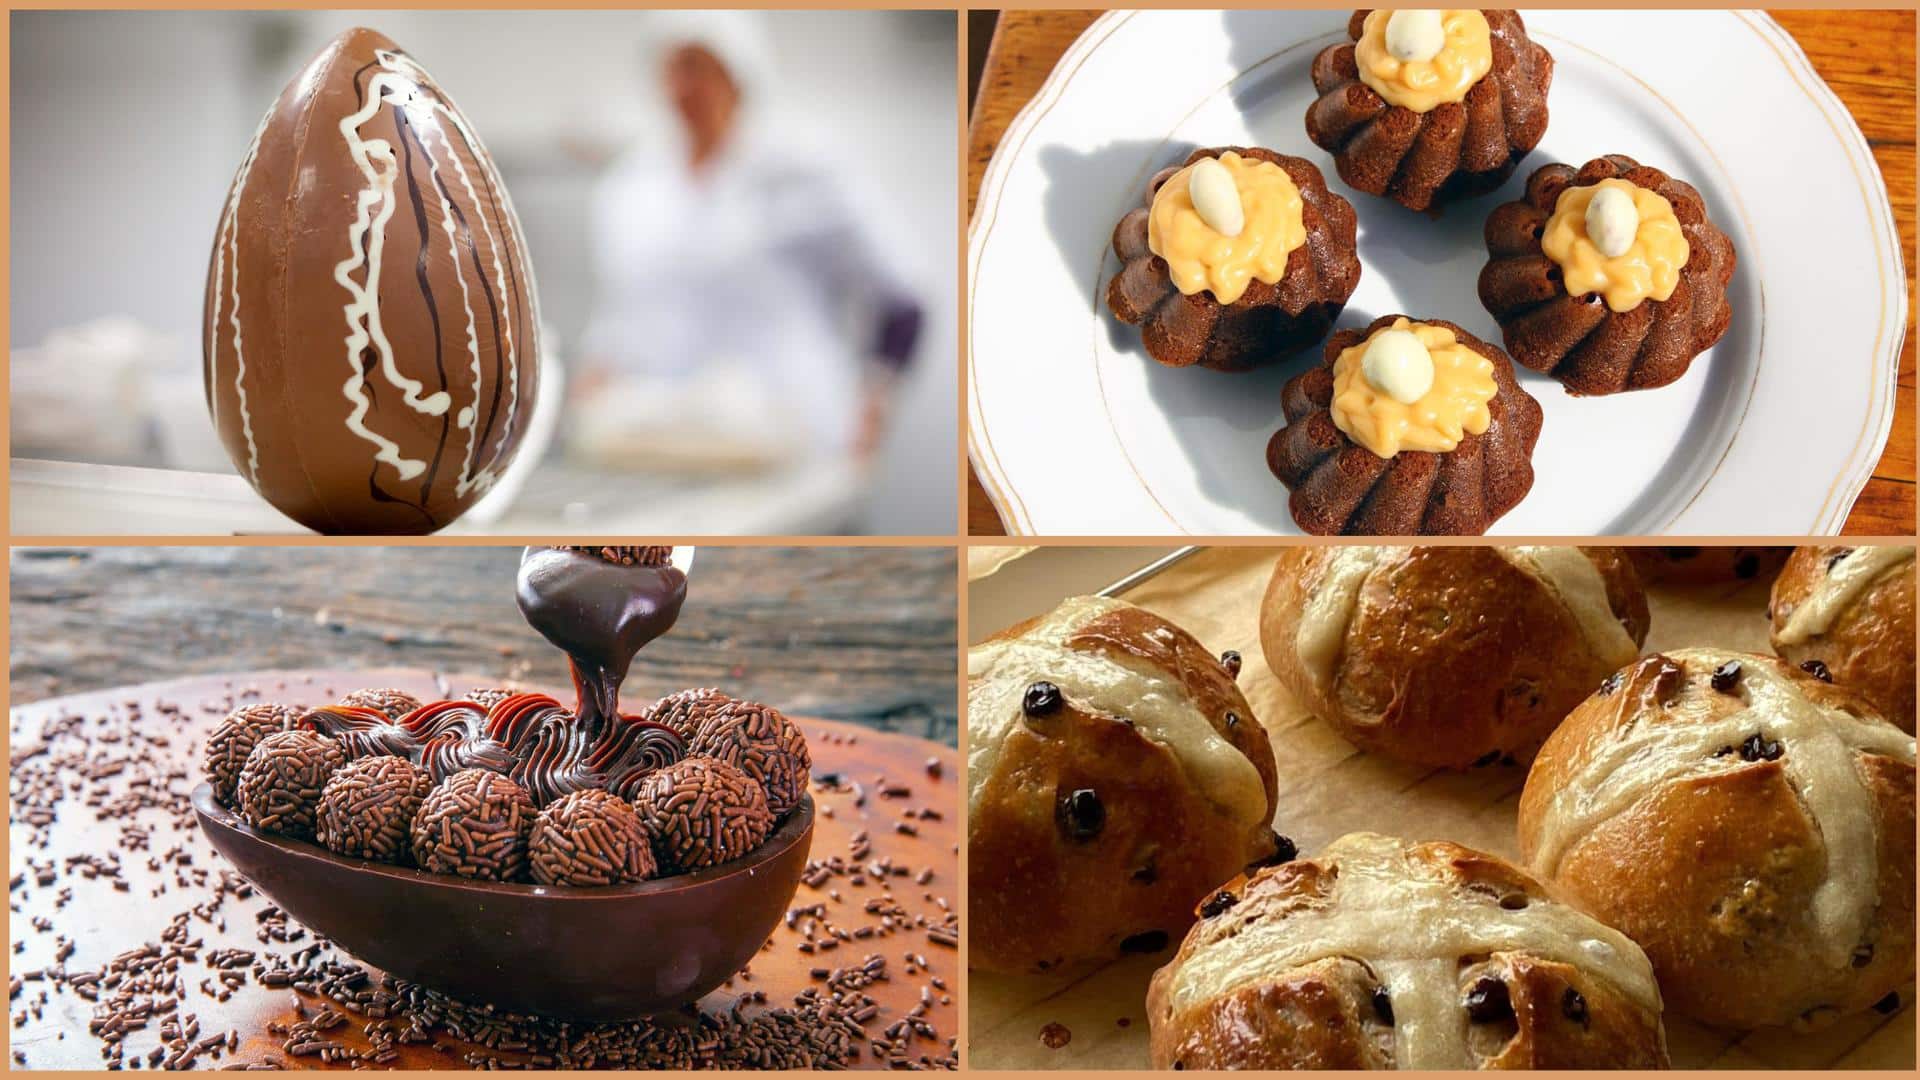 Celebrate Easter with these 5 delicious recipes